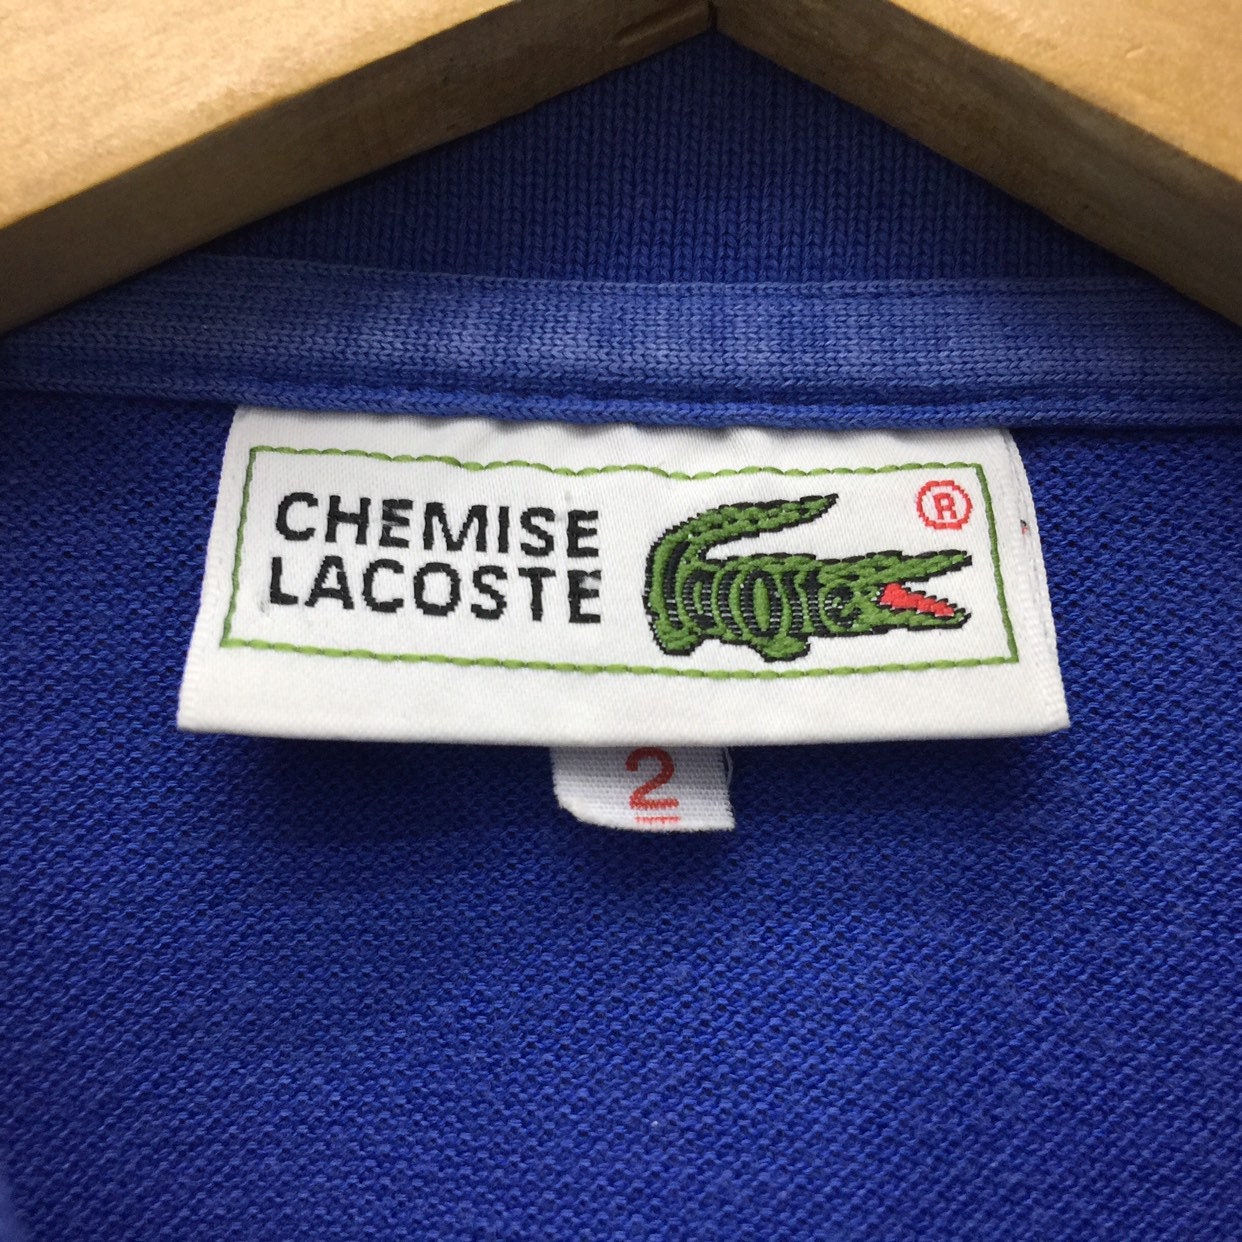 Lacoste Polo Shirt Vintage Chemise Lacoste Collared Polo Shirt - Etsy Sweden